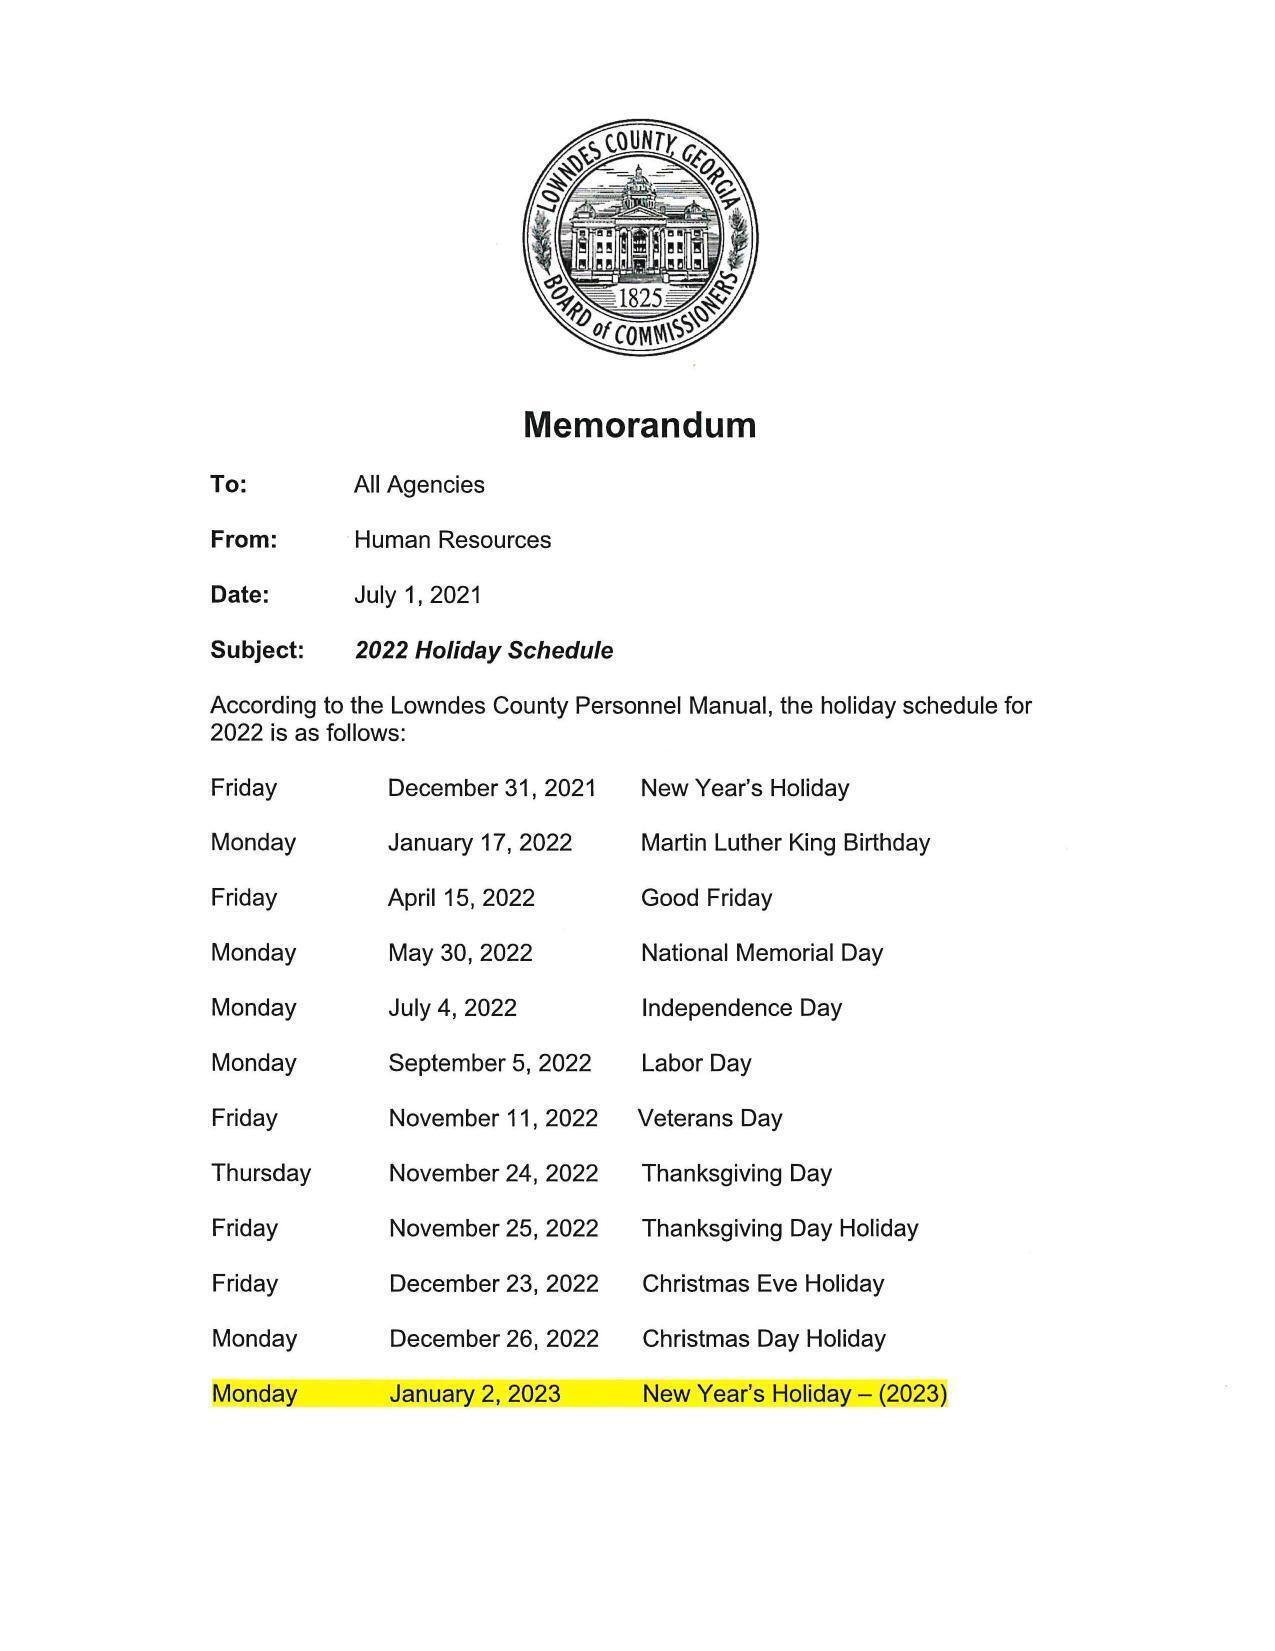 2022 Holiday Schedule